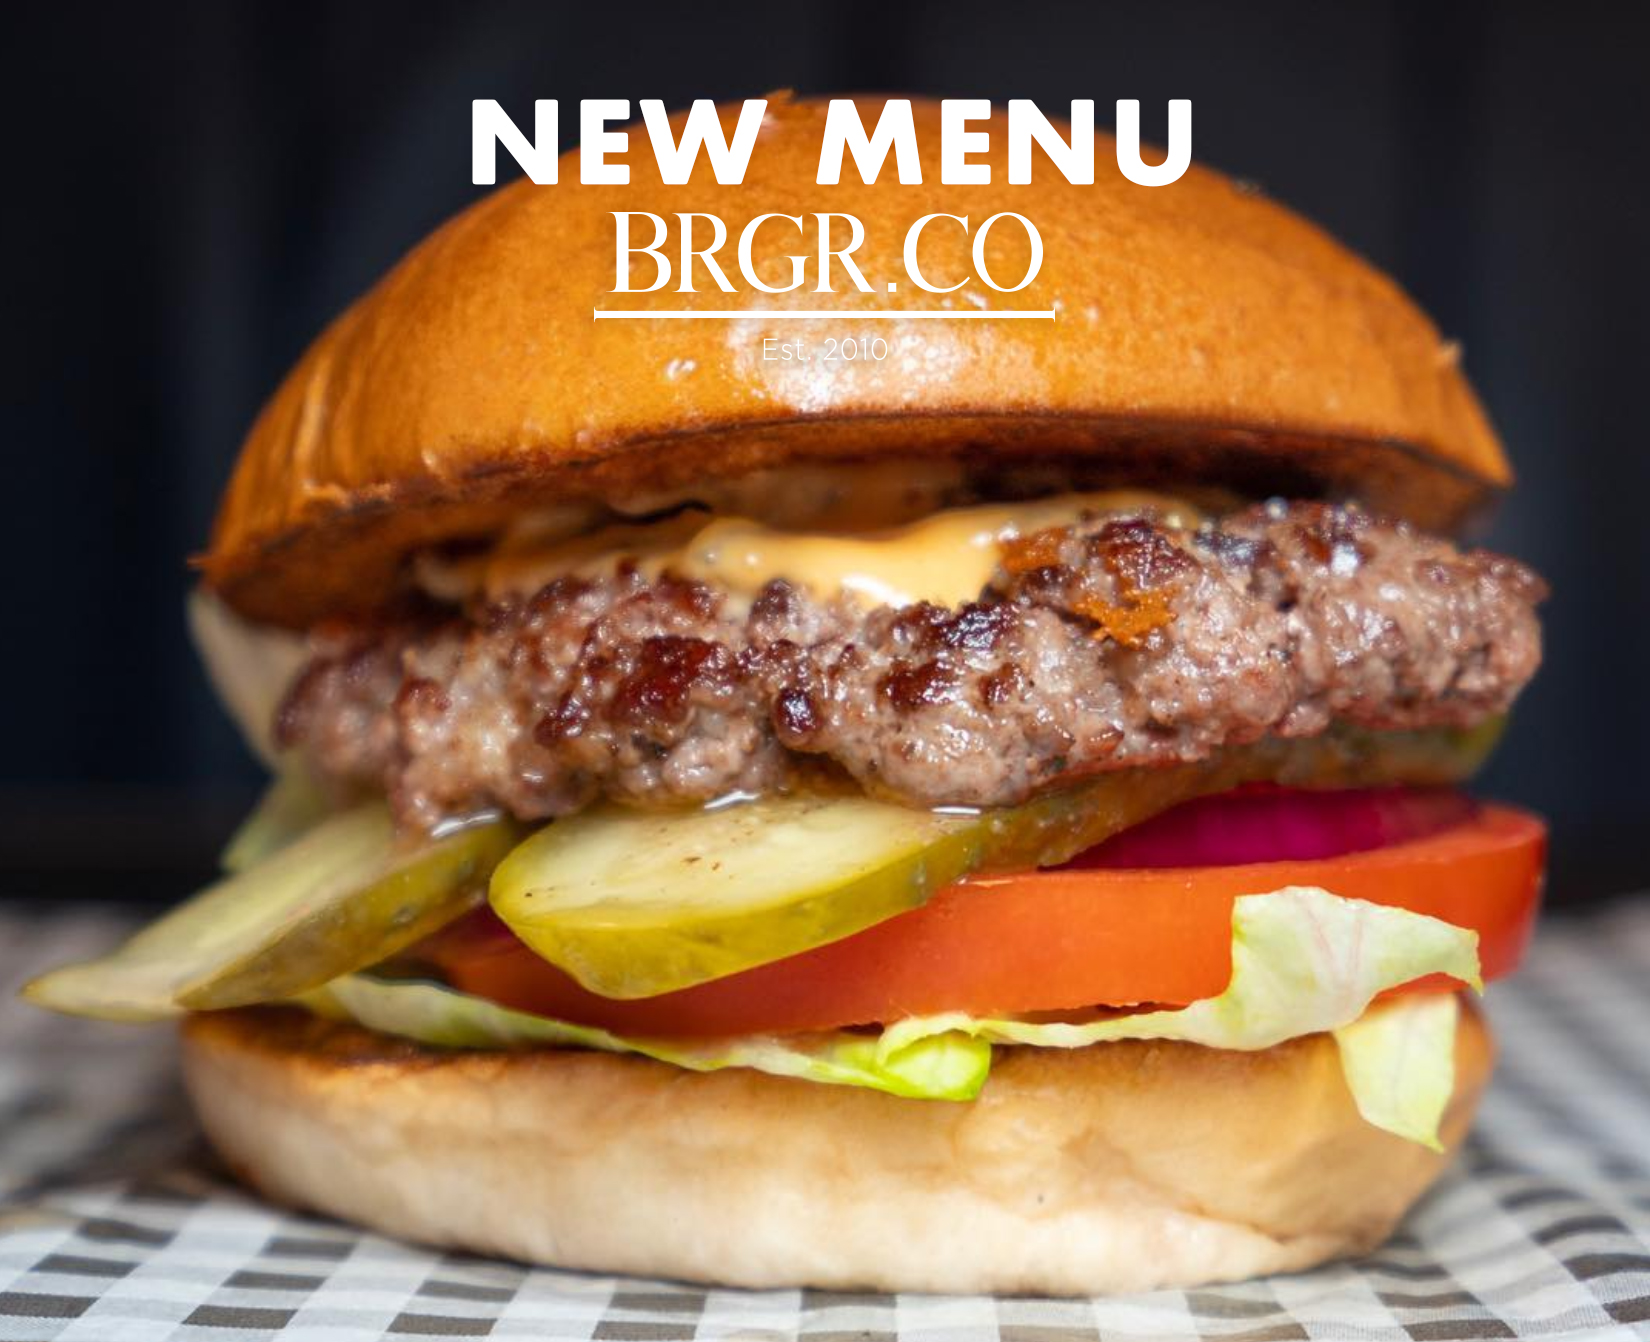 Burgers from scratch in collaboration with Brgr.Co